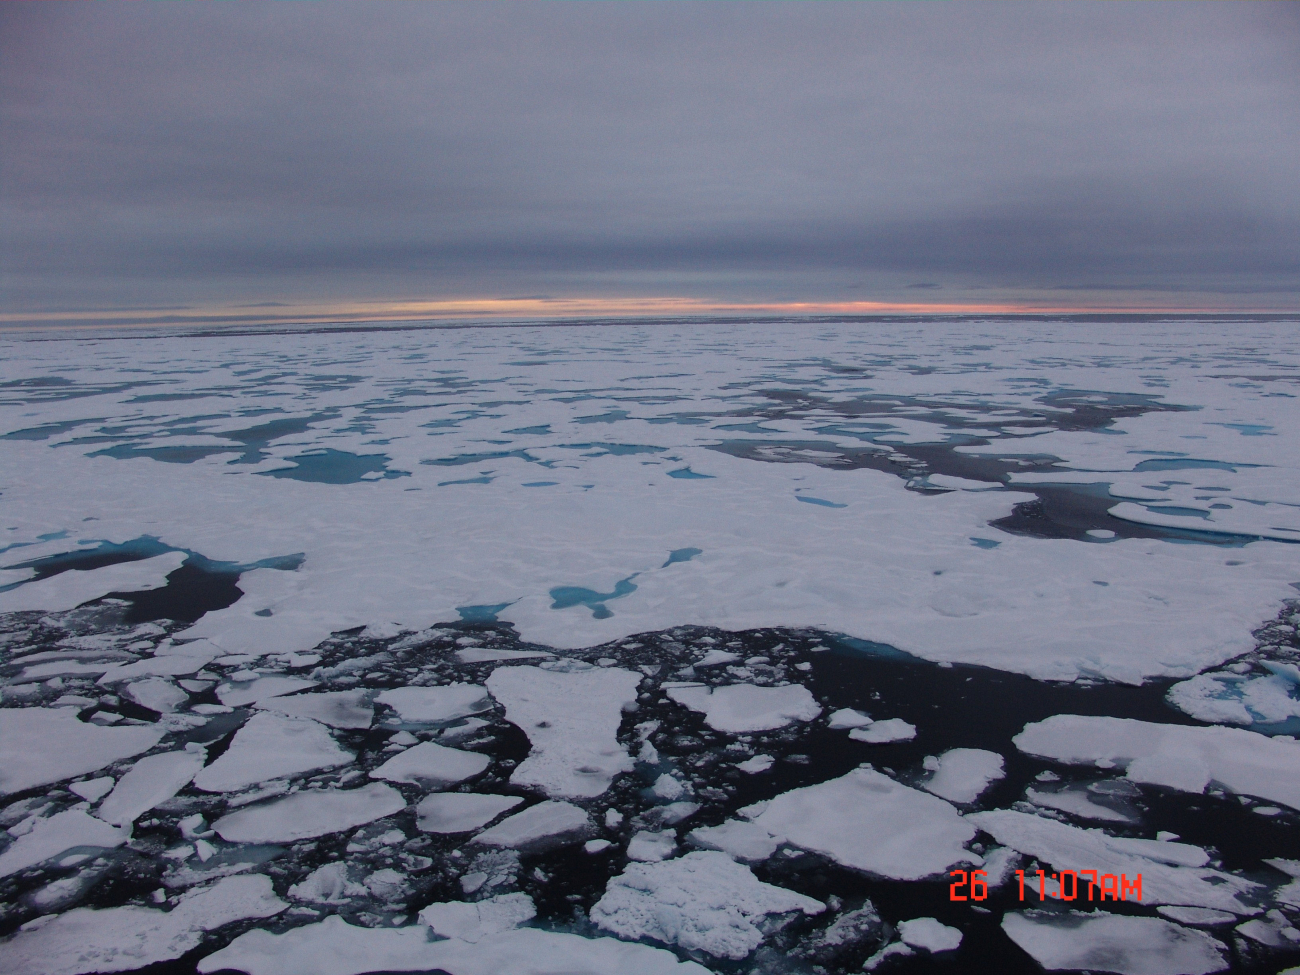 Small first- to second-year adjacent to area of multi-year floes with aquamarine melt ponds